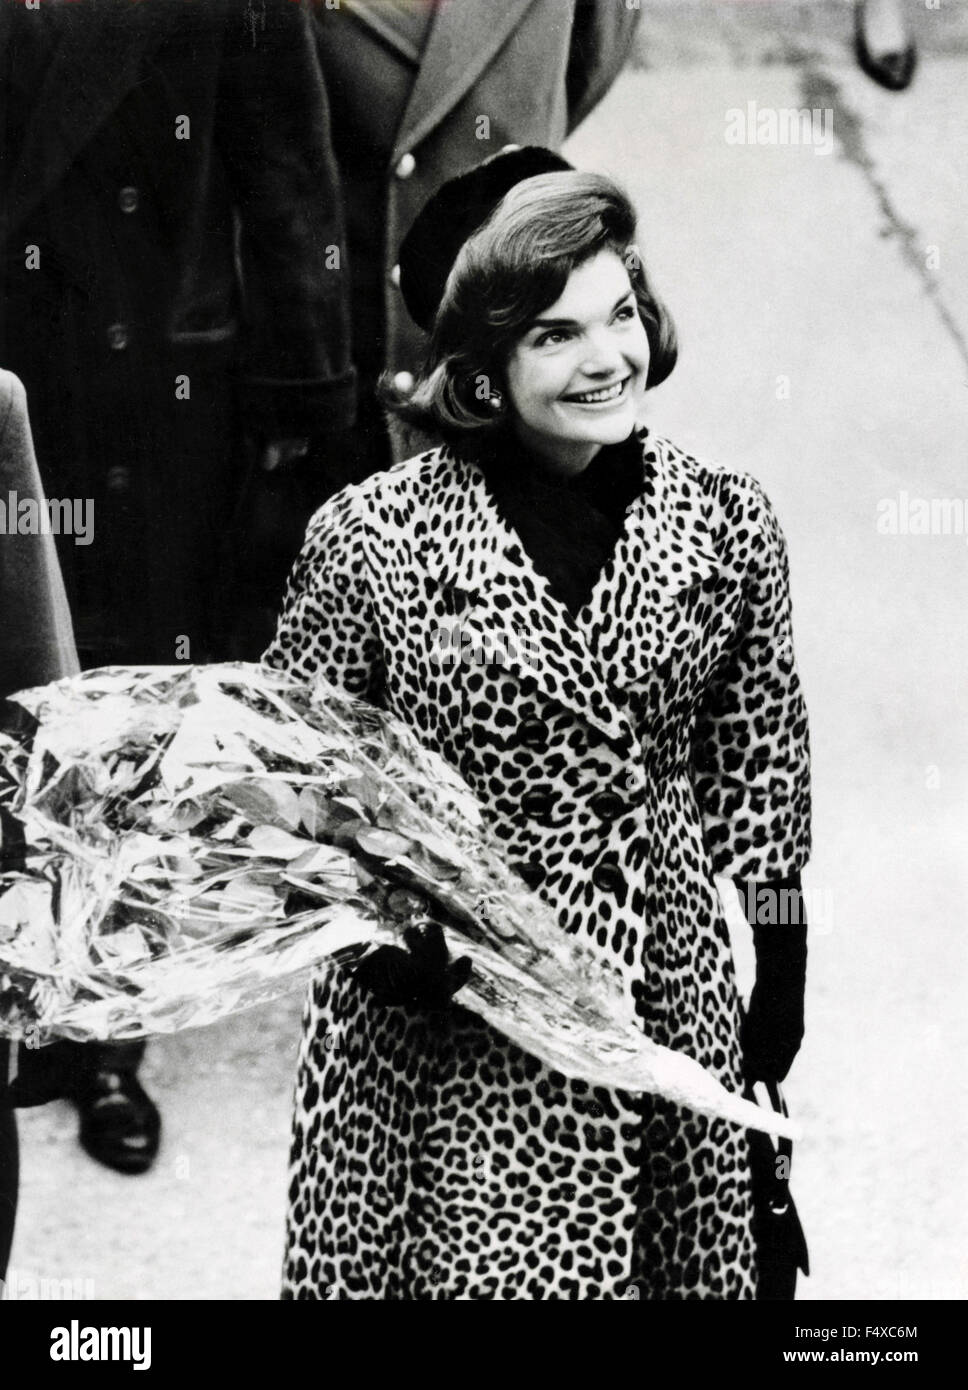 Mrs. Jacqueline Kennedy on her arrival at Fiumicino Airport, Rome, Italy Stock Photo